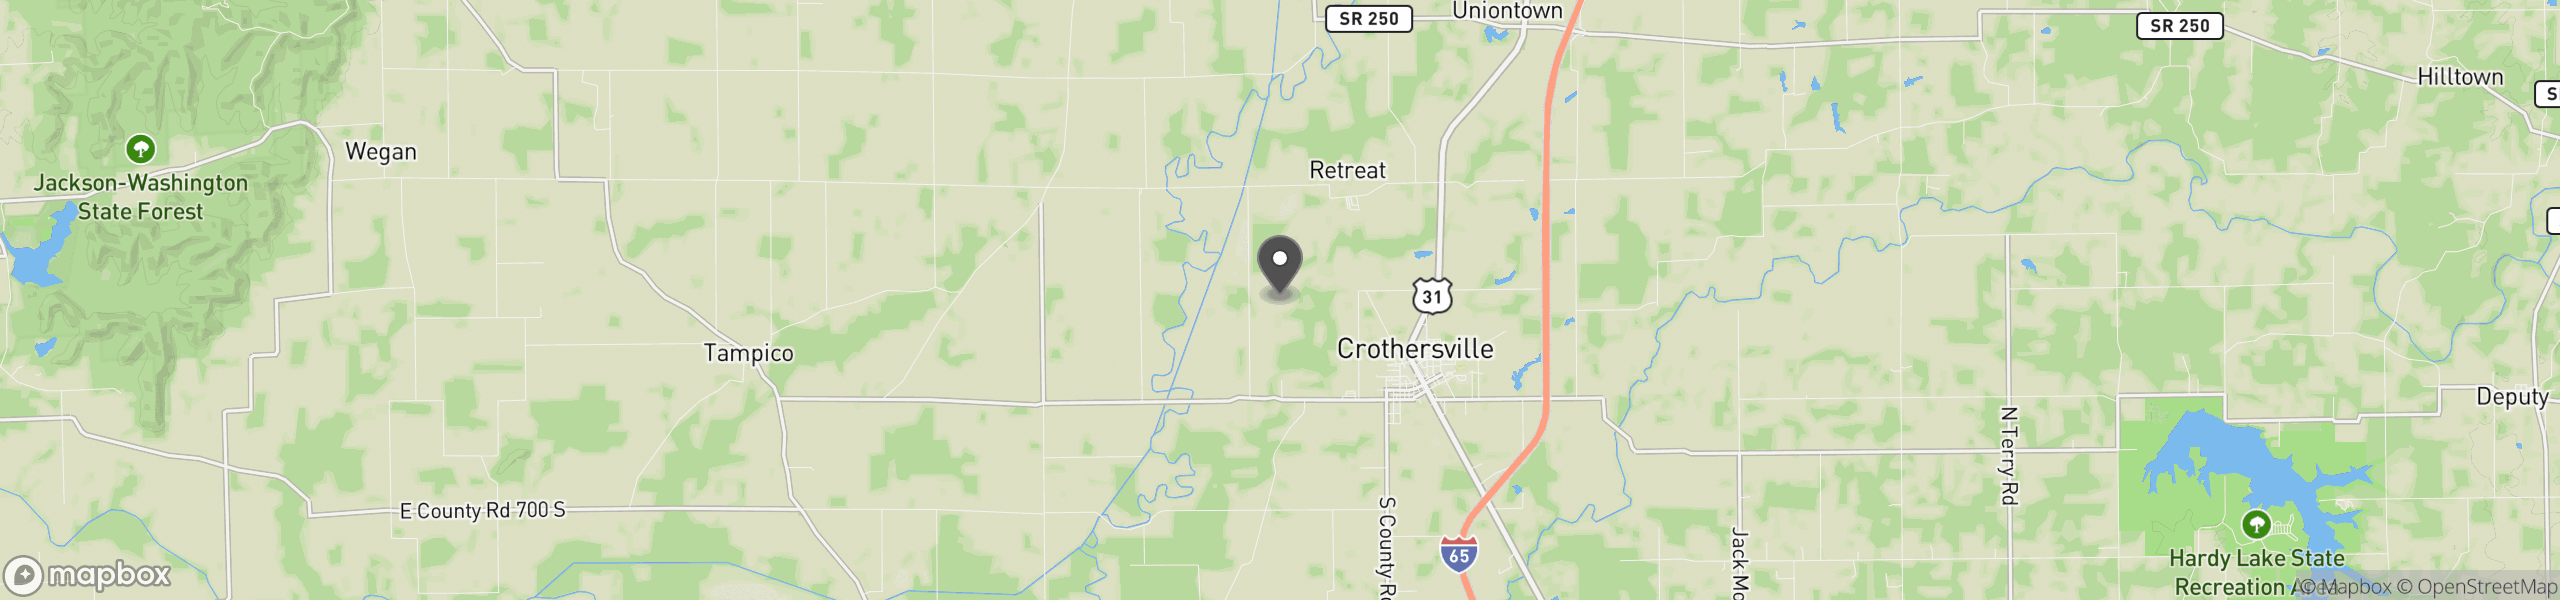 Crothersville, IN 47229